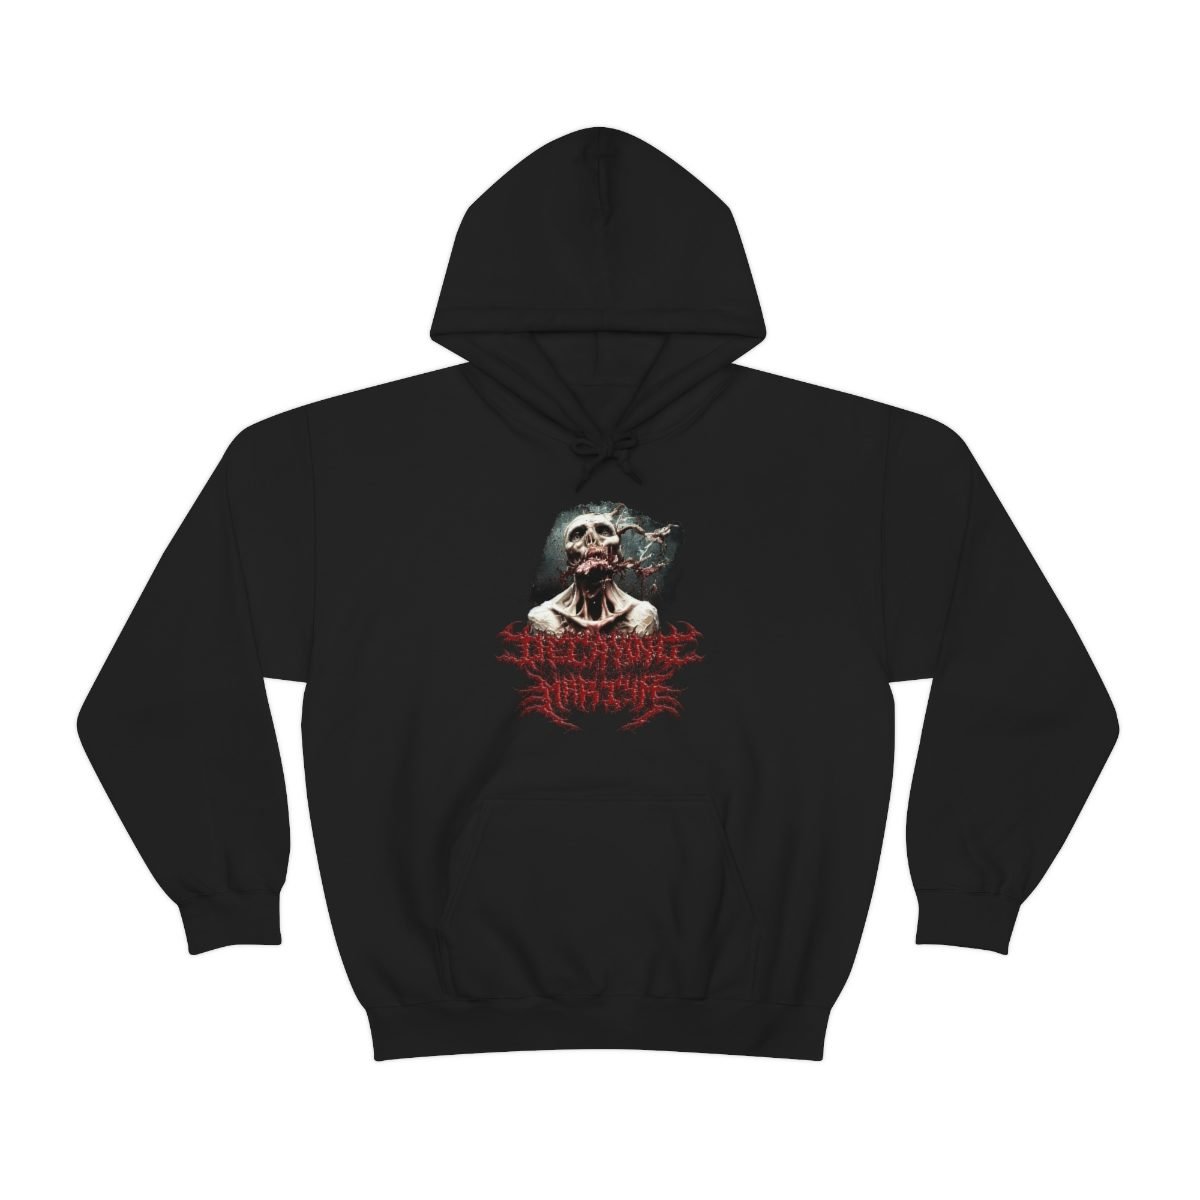 Decaying Martyr (The Charon Collective) Pullover Hooded Sweatshirt